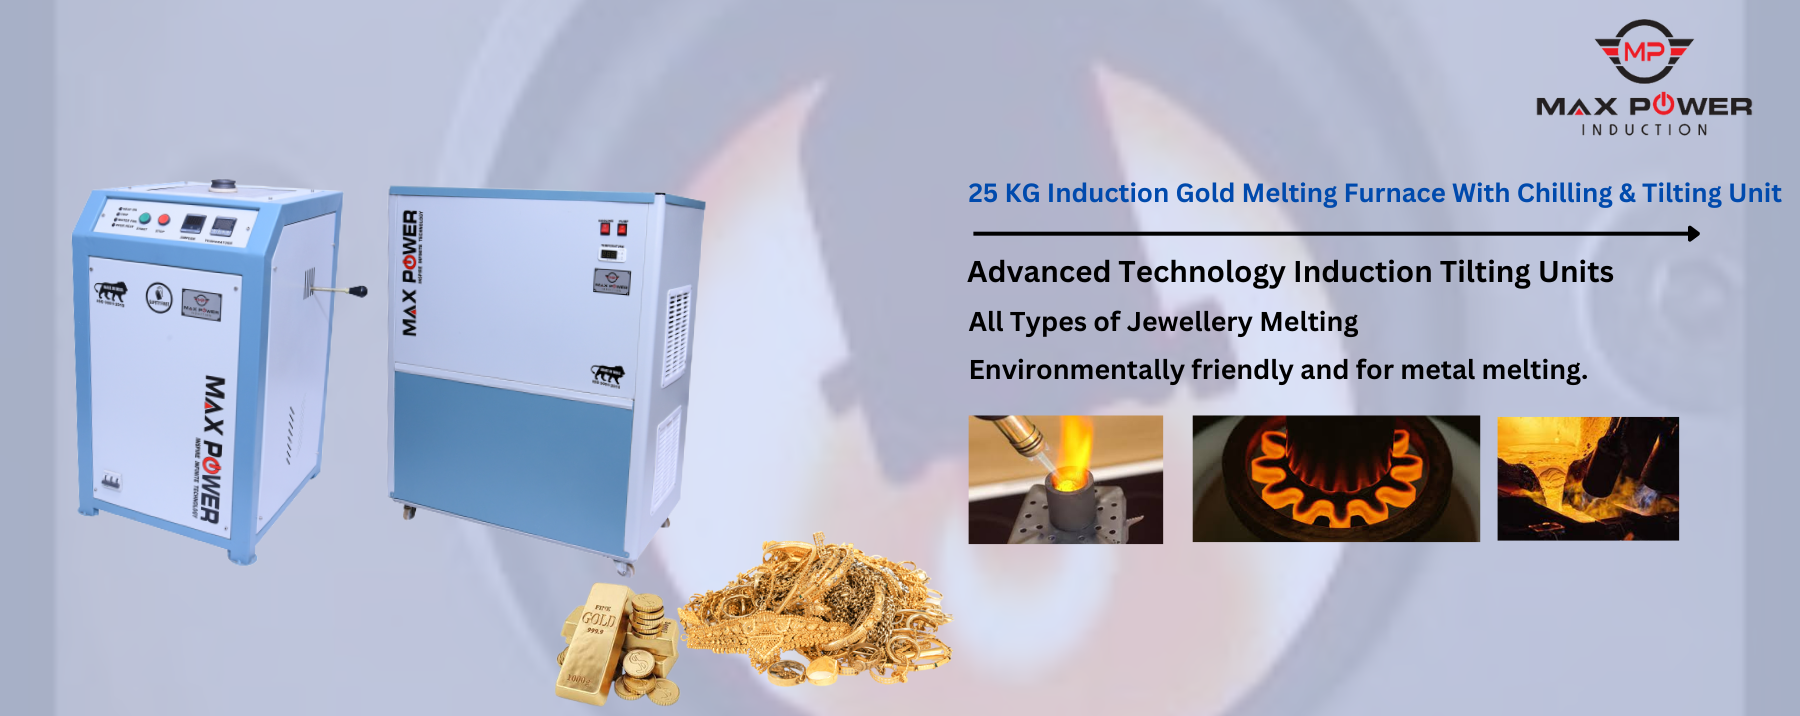 15 KG INDUCTION GOLD MELTING FURNACE WITH TILTING UNIT MANUFACTURERS IN JHARKHAND